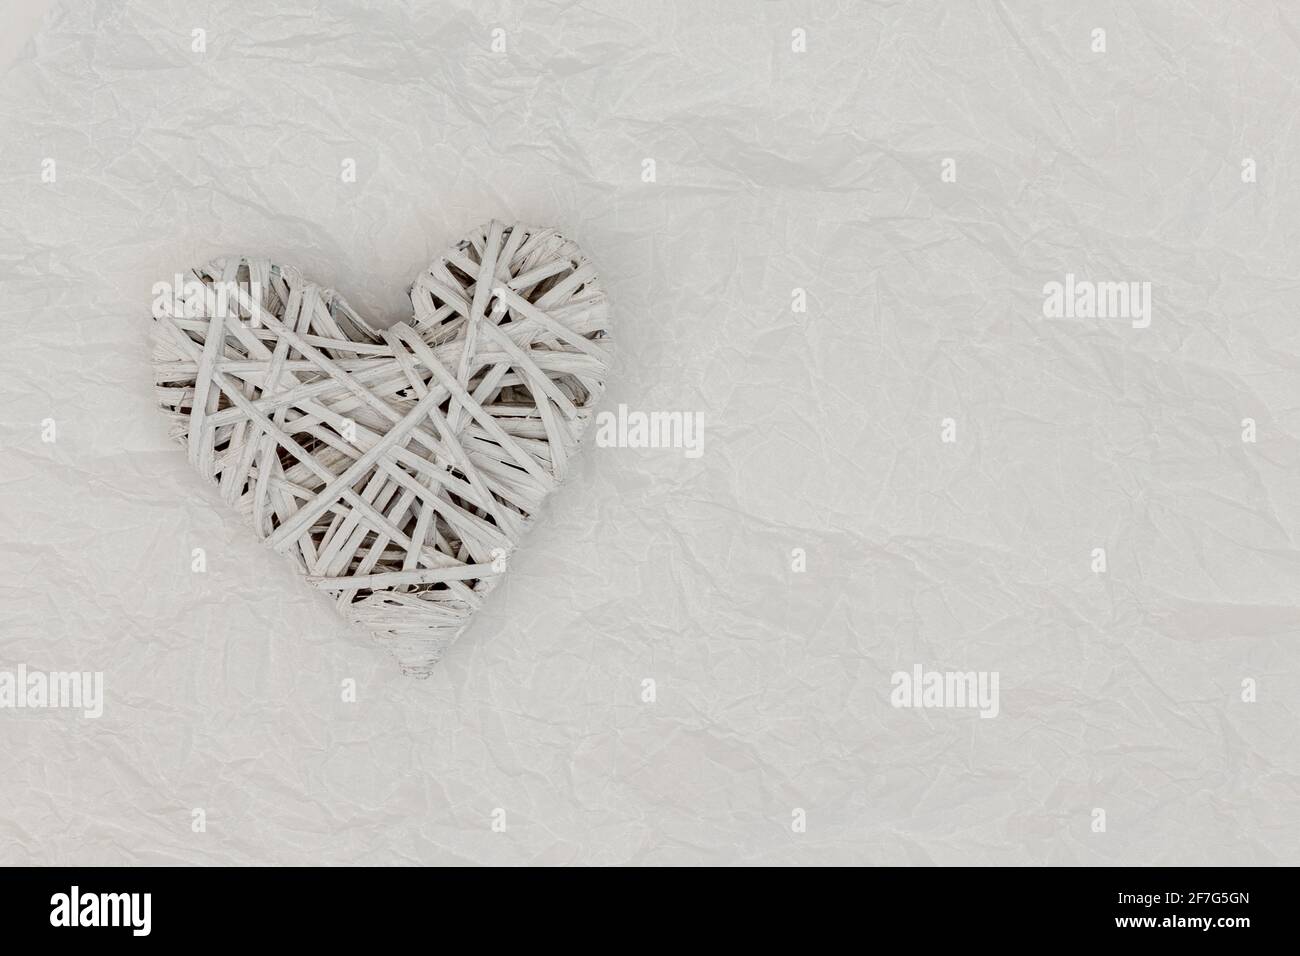 Love and still life concept. Valentines day holiday card with heart. Wood heart made of interwoven natural twigs symbolic of love and romance. Stock Photo